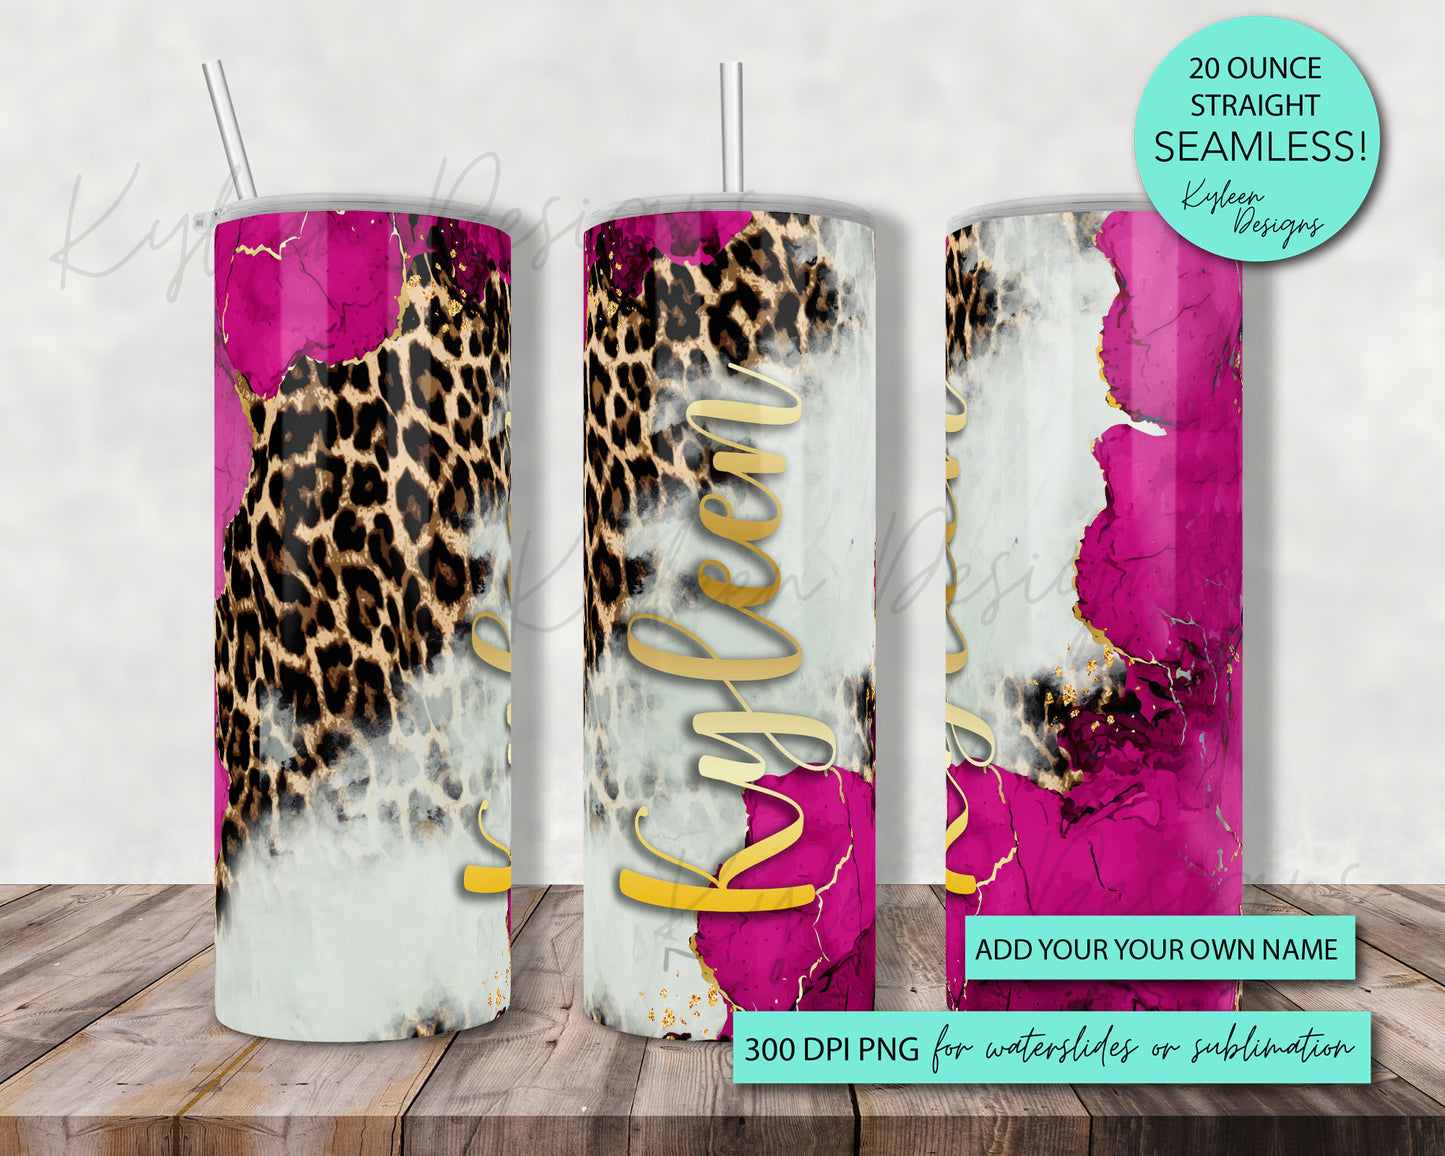 Add your own name SEAMLESS 20 ounce straight marble leopard wrap for sublimation, waterslide High res PNG digital file- Straight only-PINK